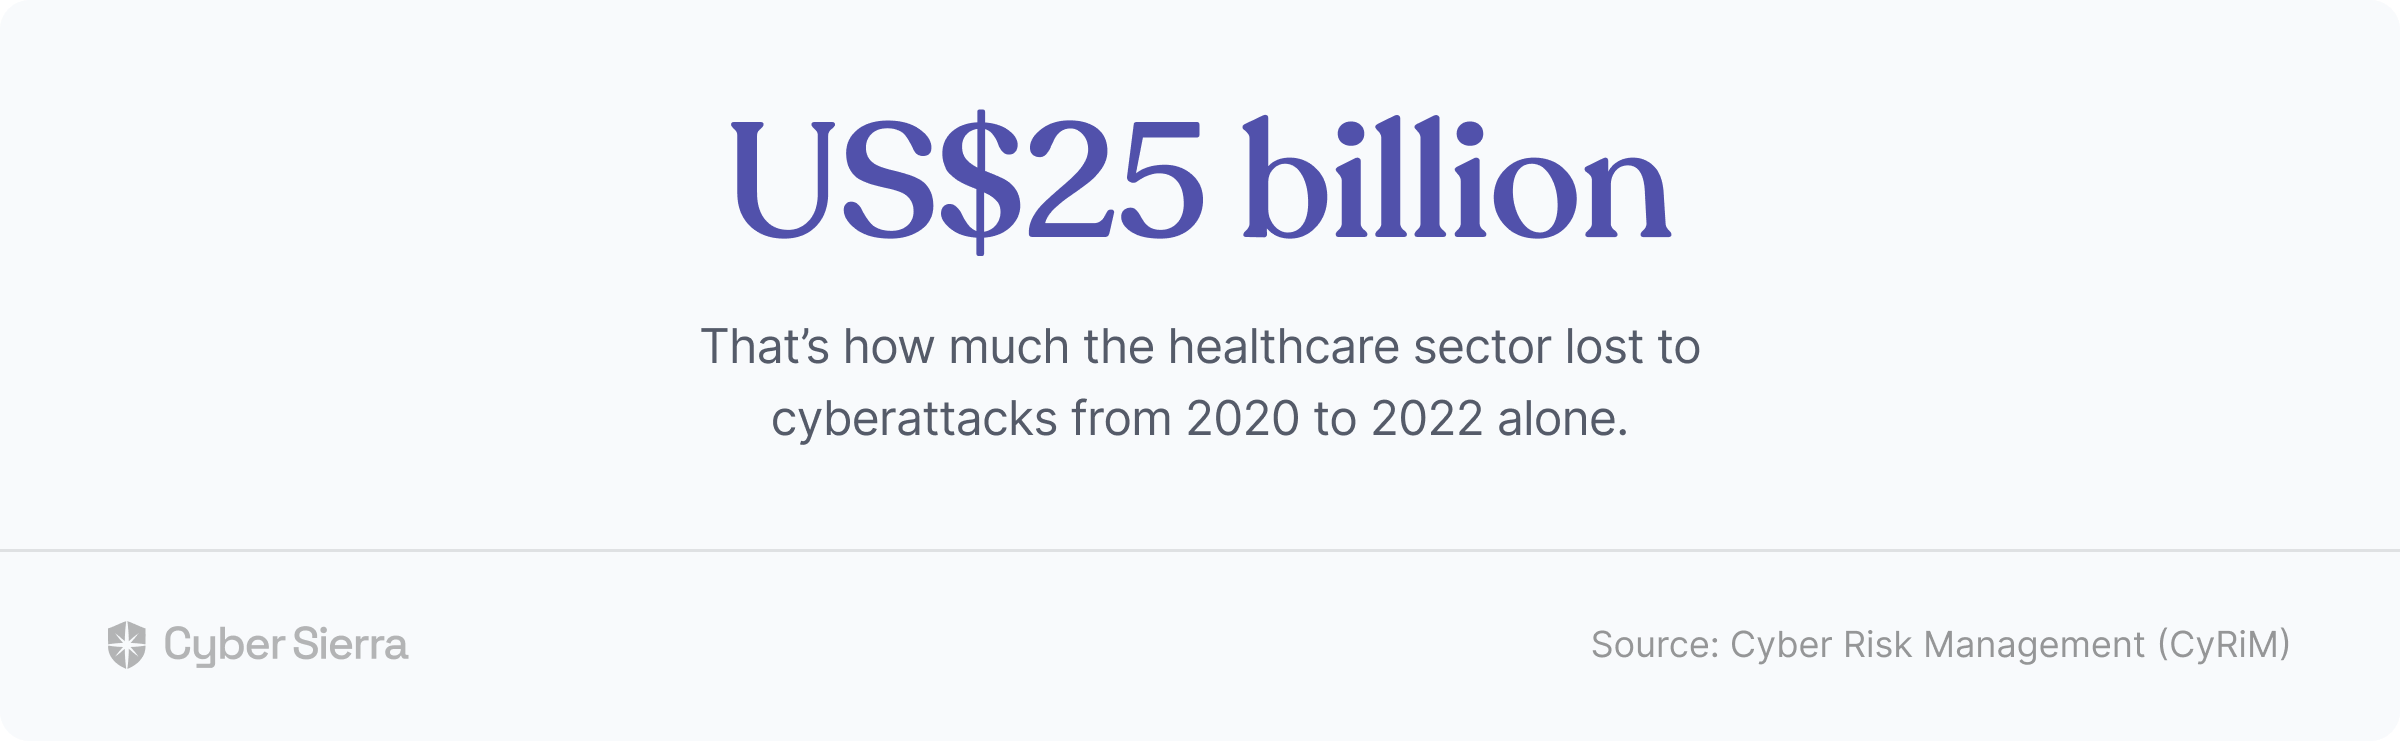 25 billion dollars lost by healthcare sector